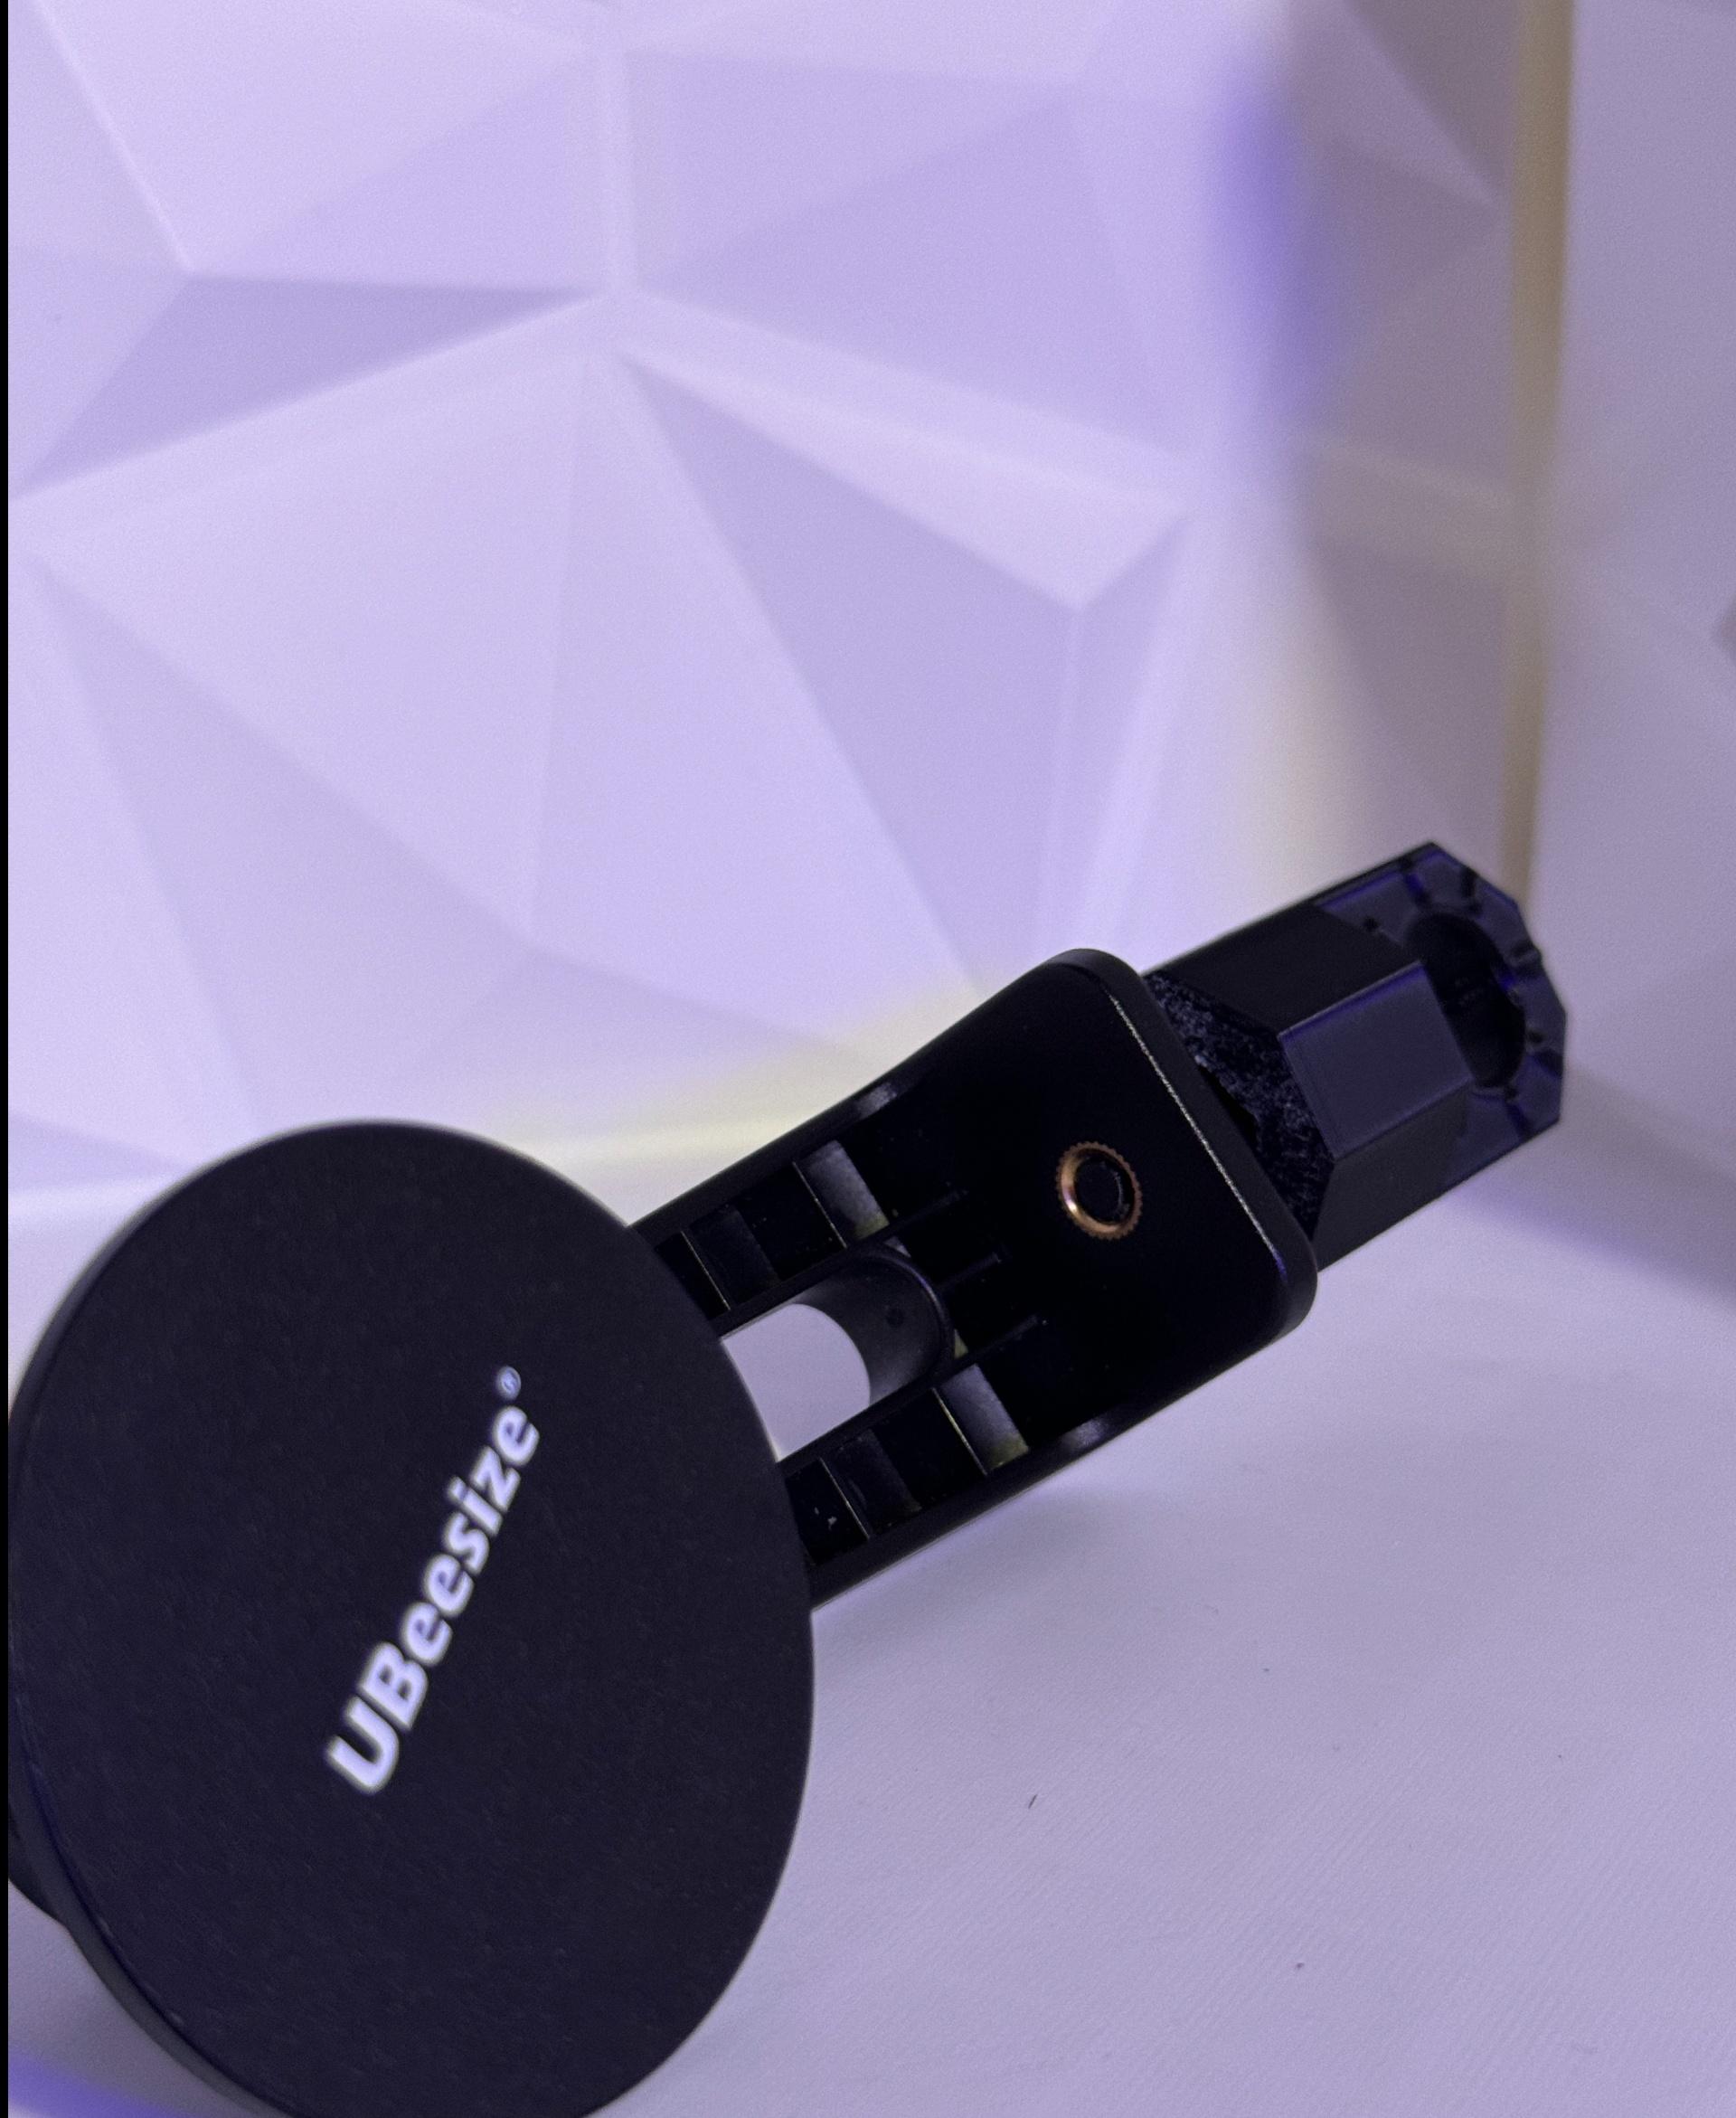 MultiBOOM 1/4-20 Adapter - It works great with my mag-safe tripod connector. - 3d model